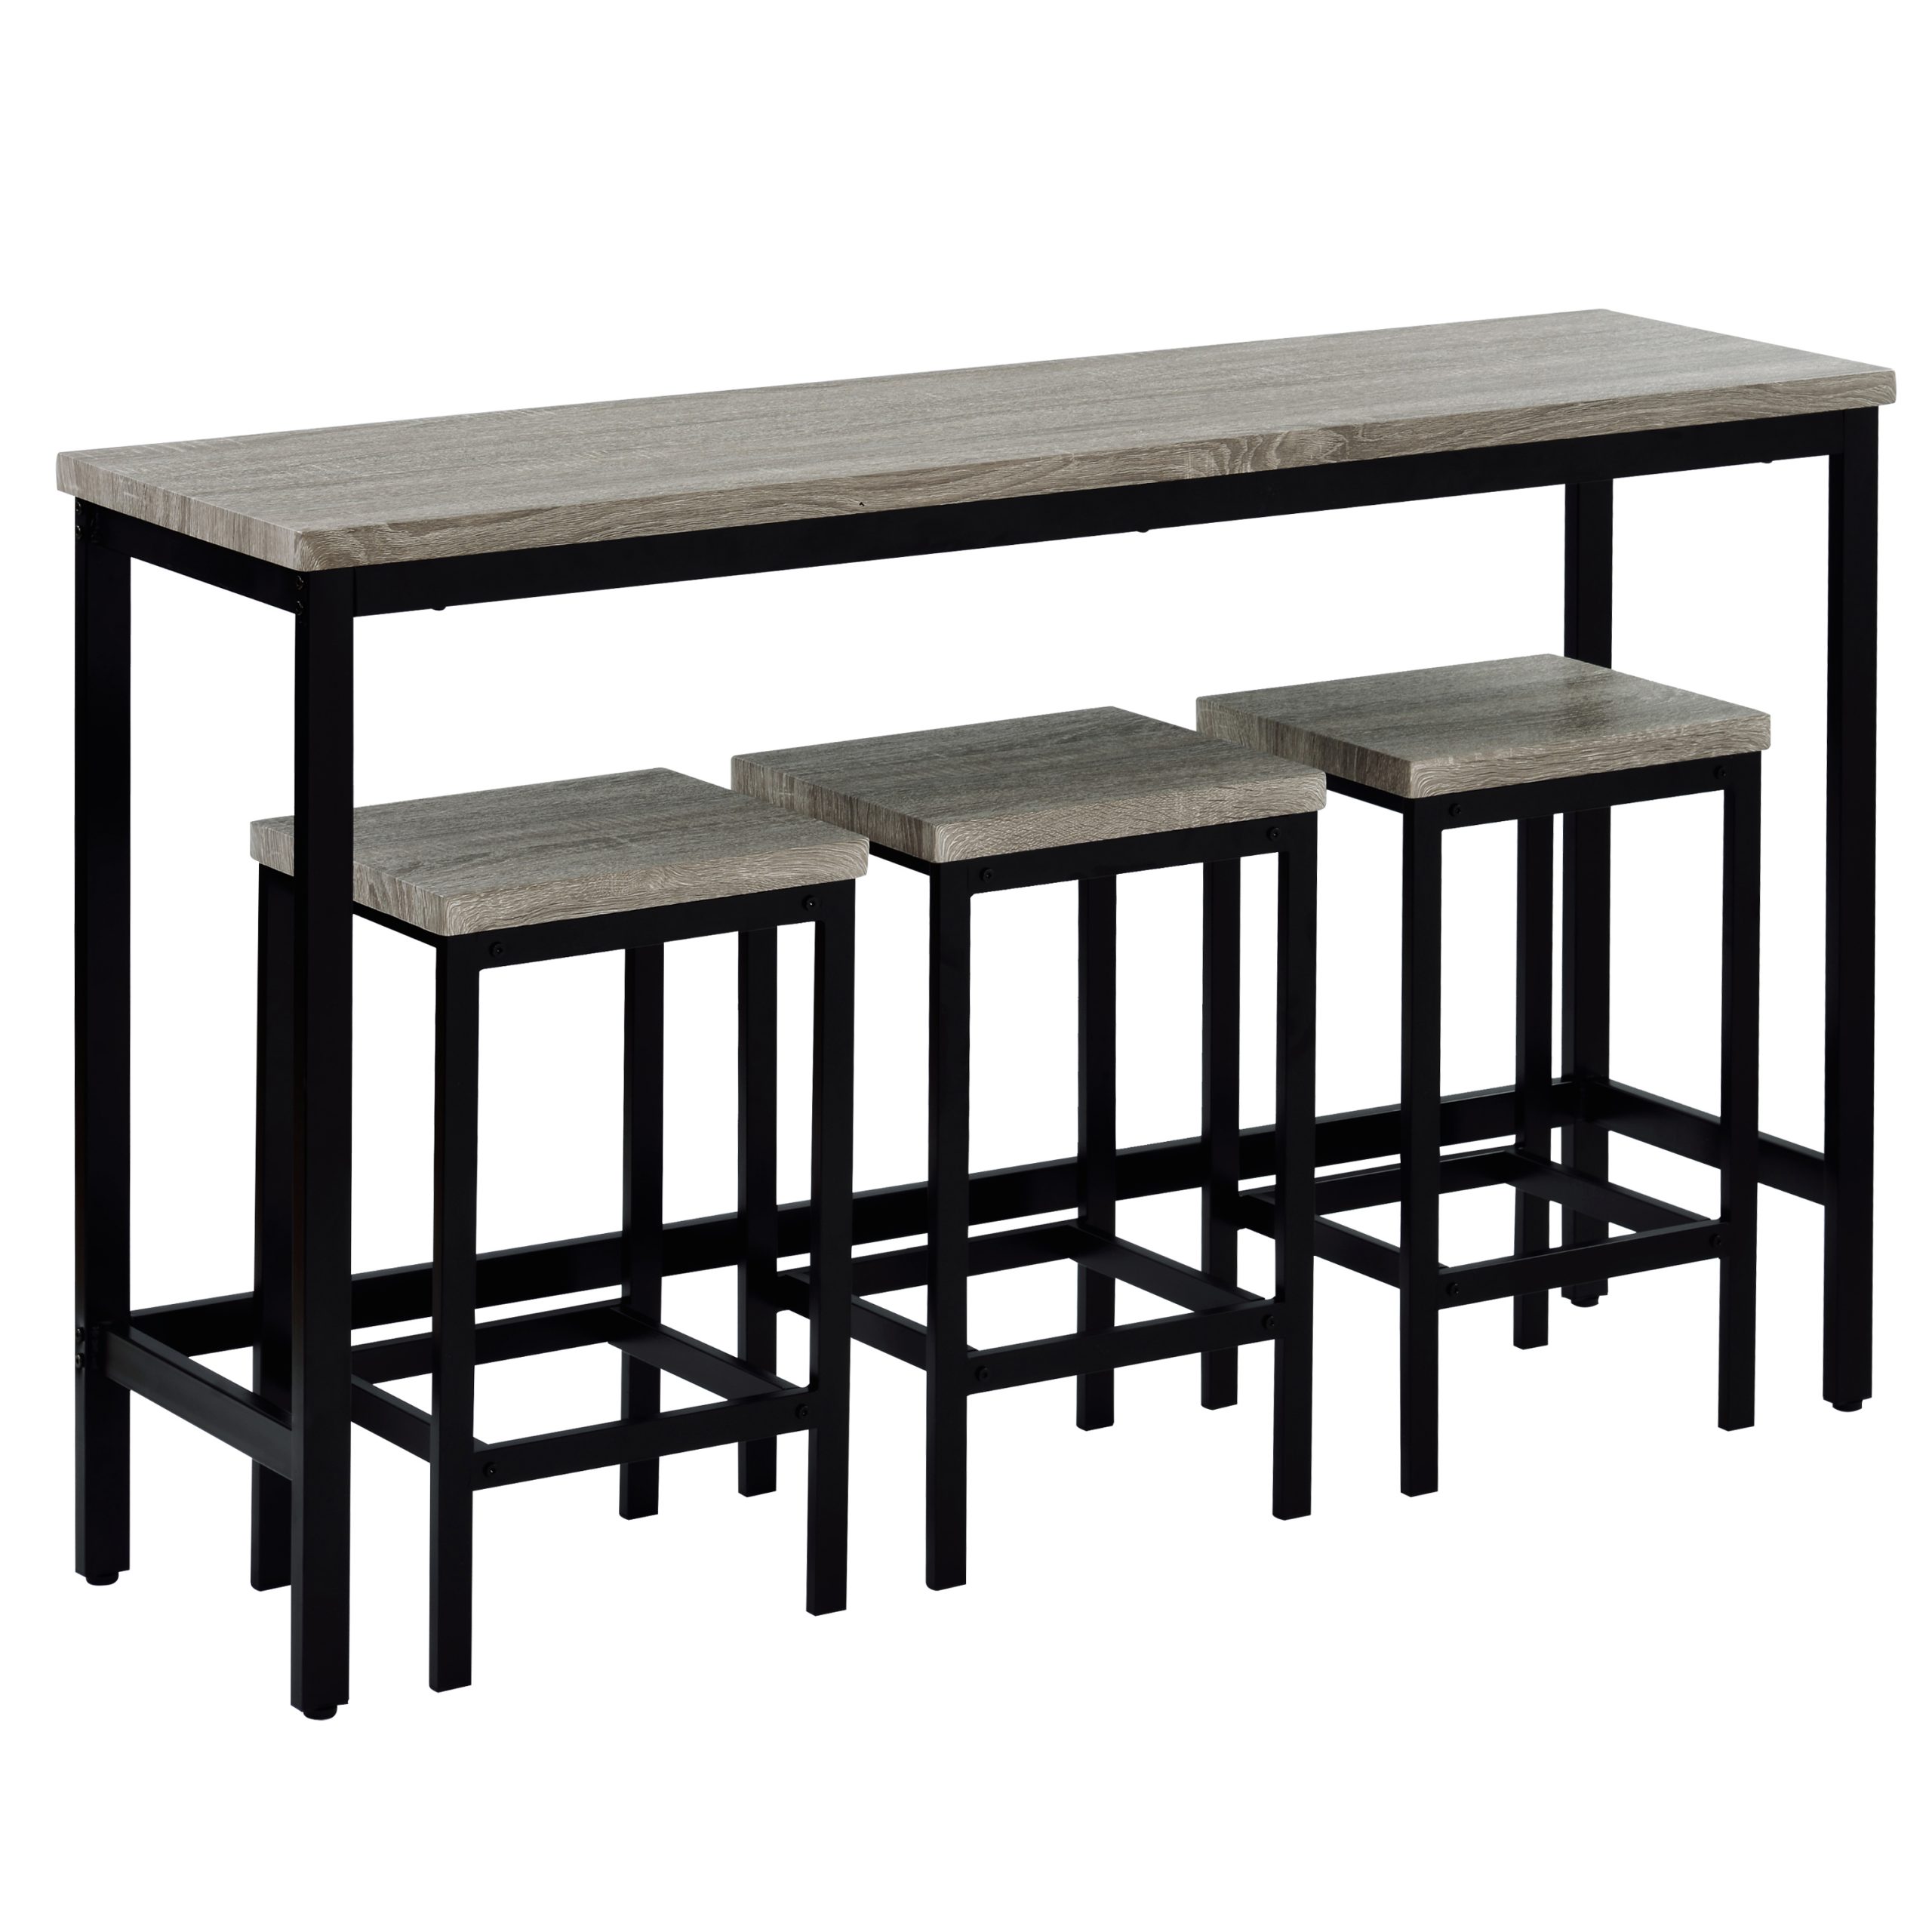 Long Dining Table Set with 3 Stools - WF198129AAE